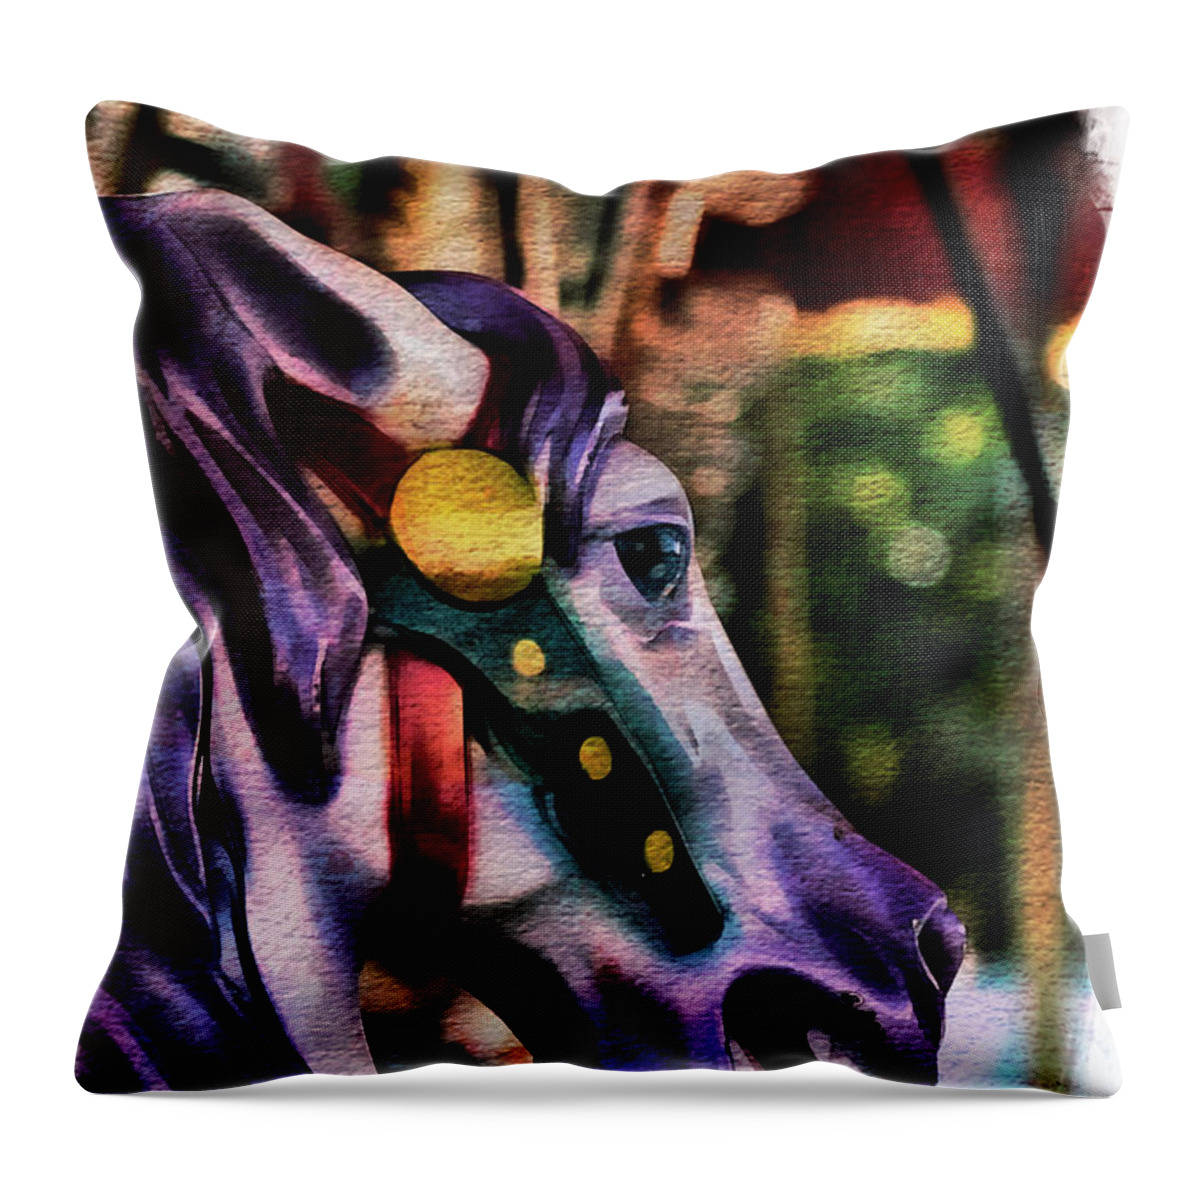 Carousel Throw Pillow featuring the photograph Purple Carousel Horse by Norma Warden